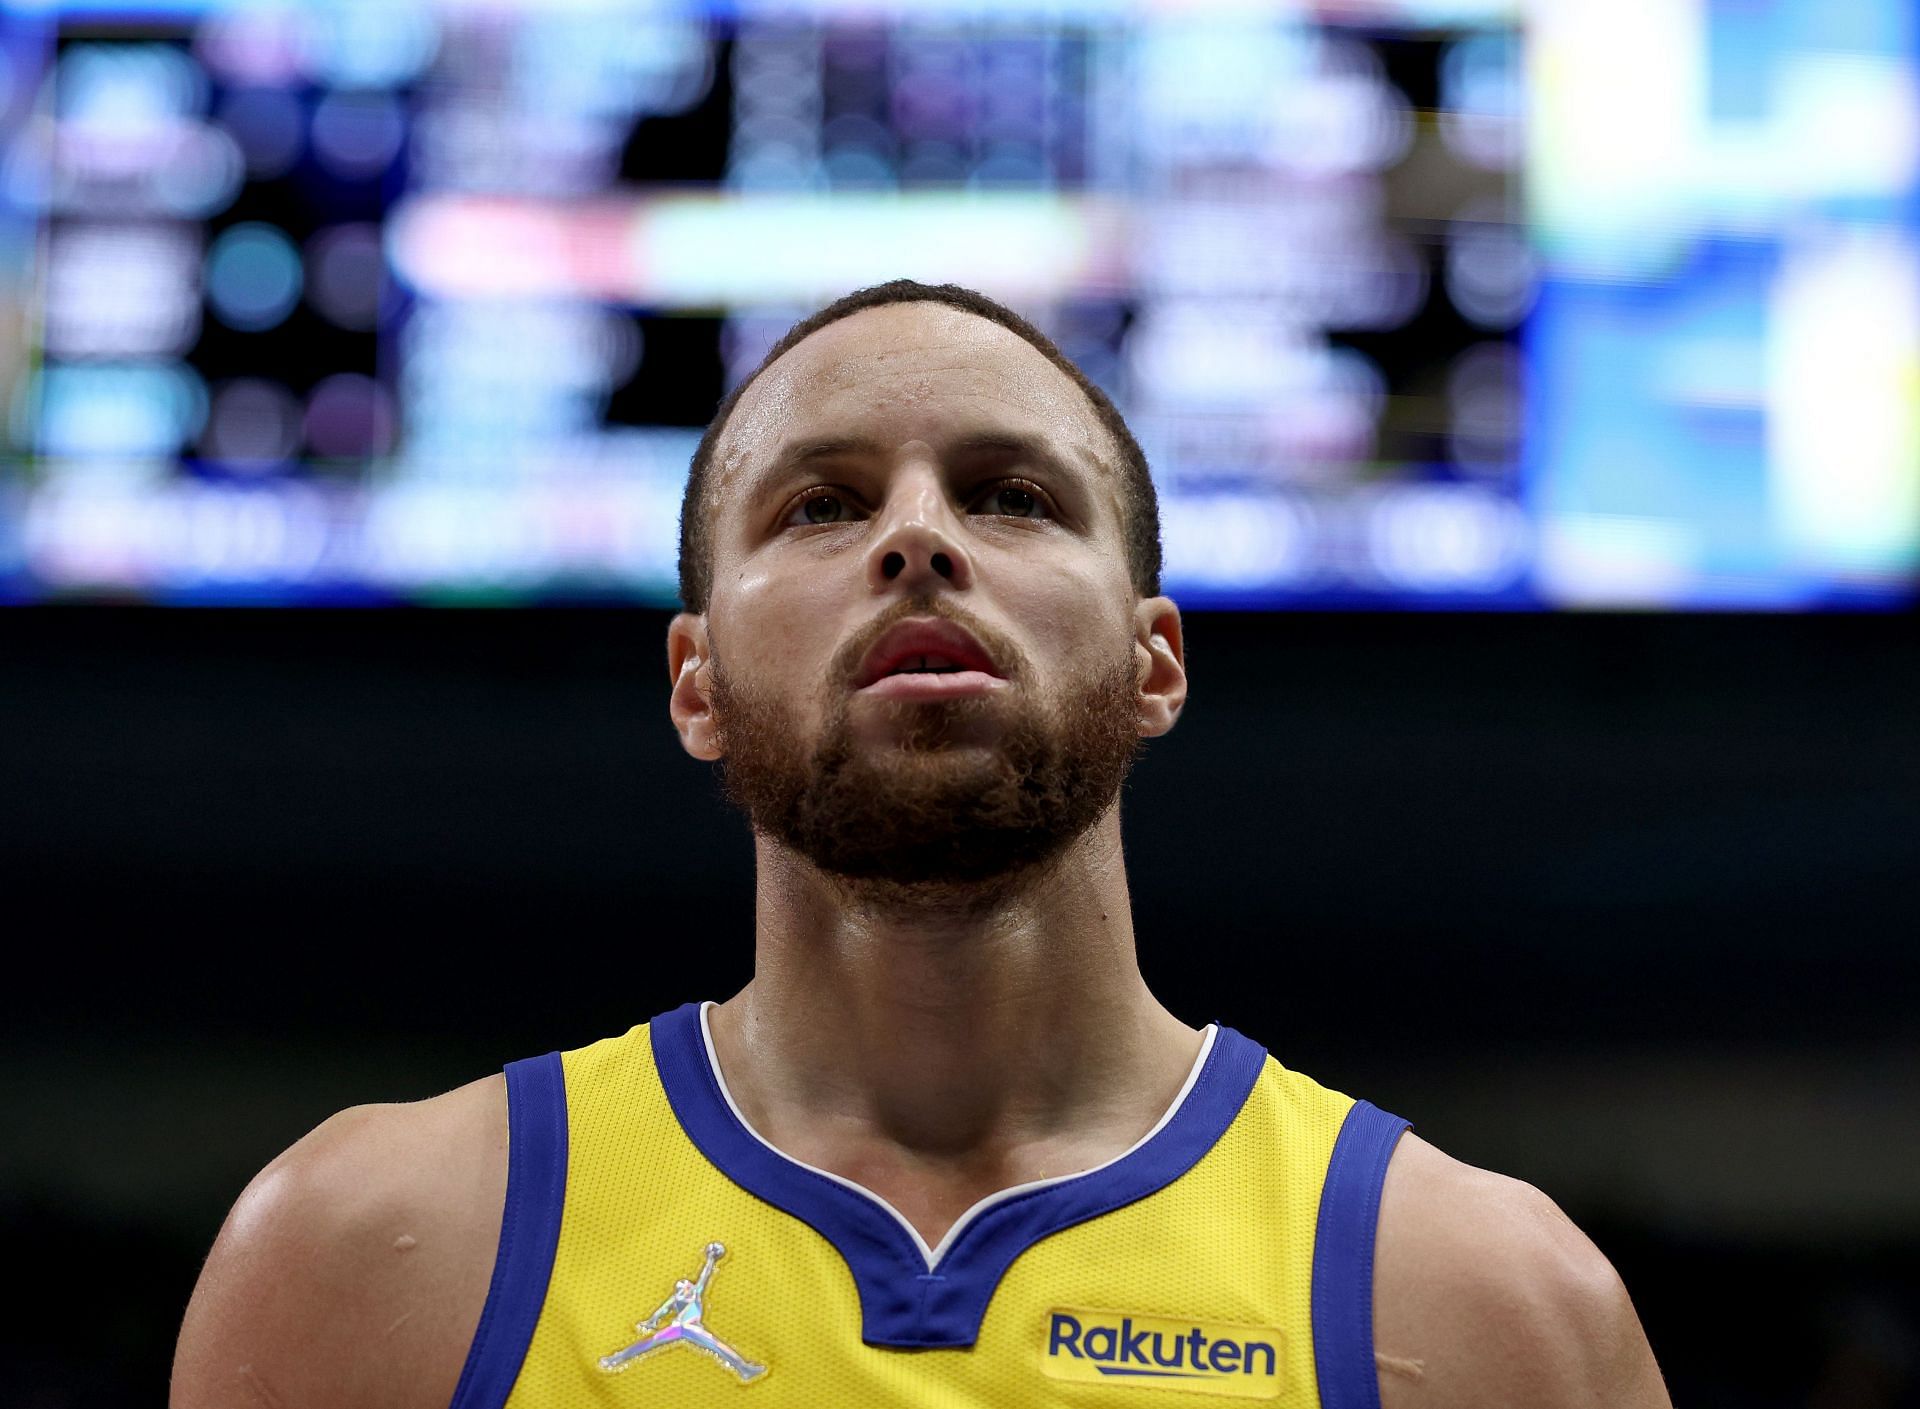 Steph Curry #30 of the Golden State Warriors reacts while taking on the Dallas Mavericks in the third quarter at American Airlines Center on January 05, 2022 in Dallas, Texas.